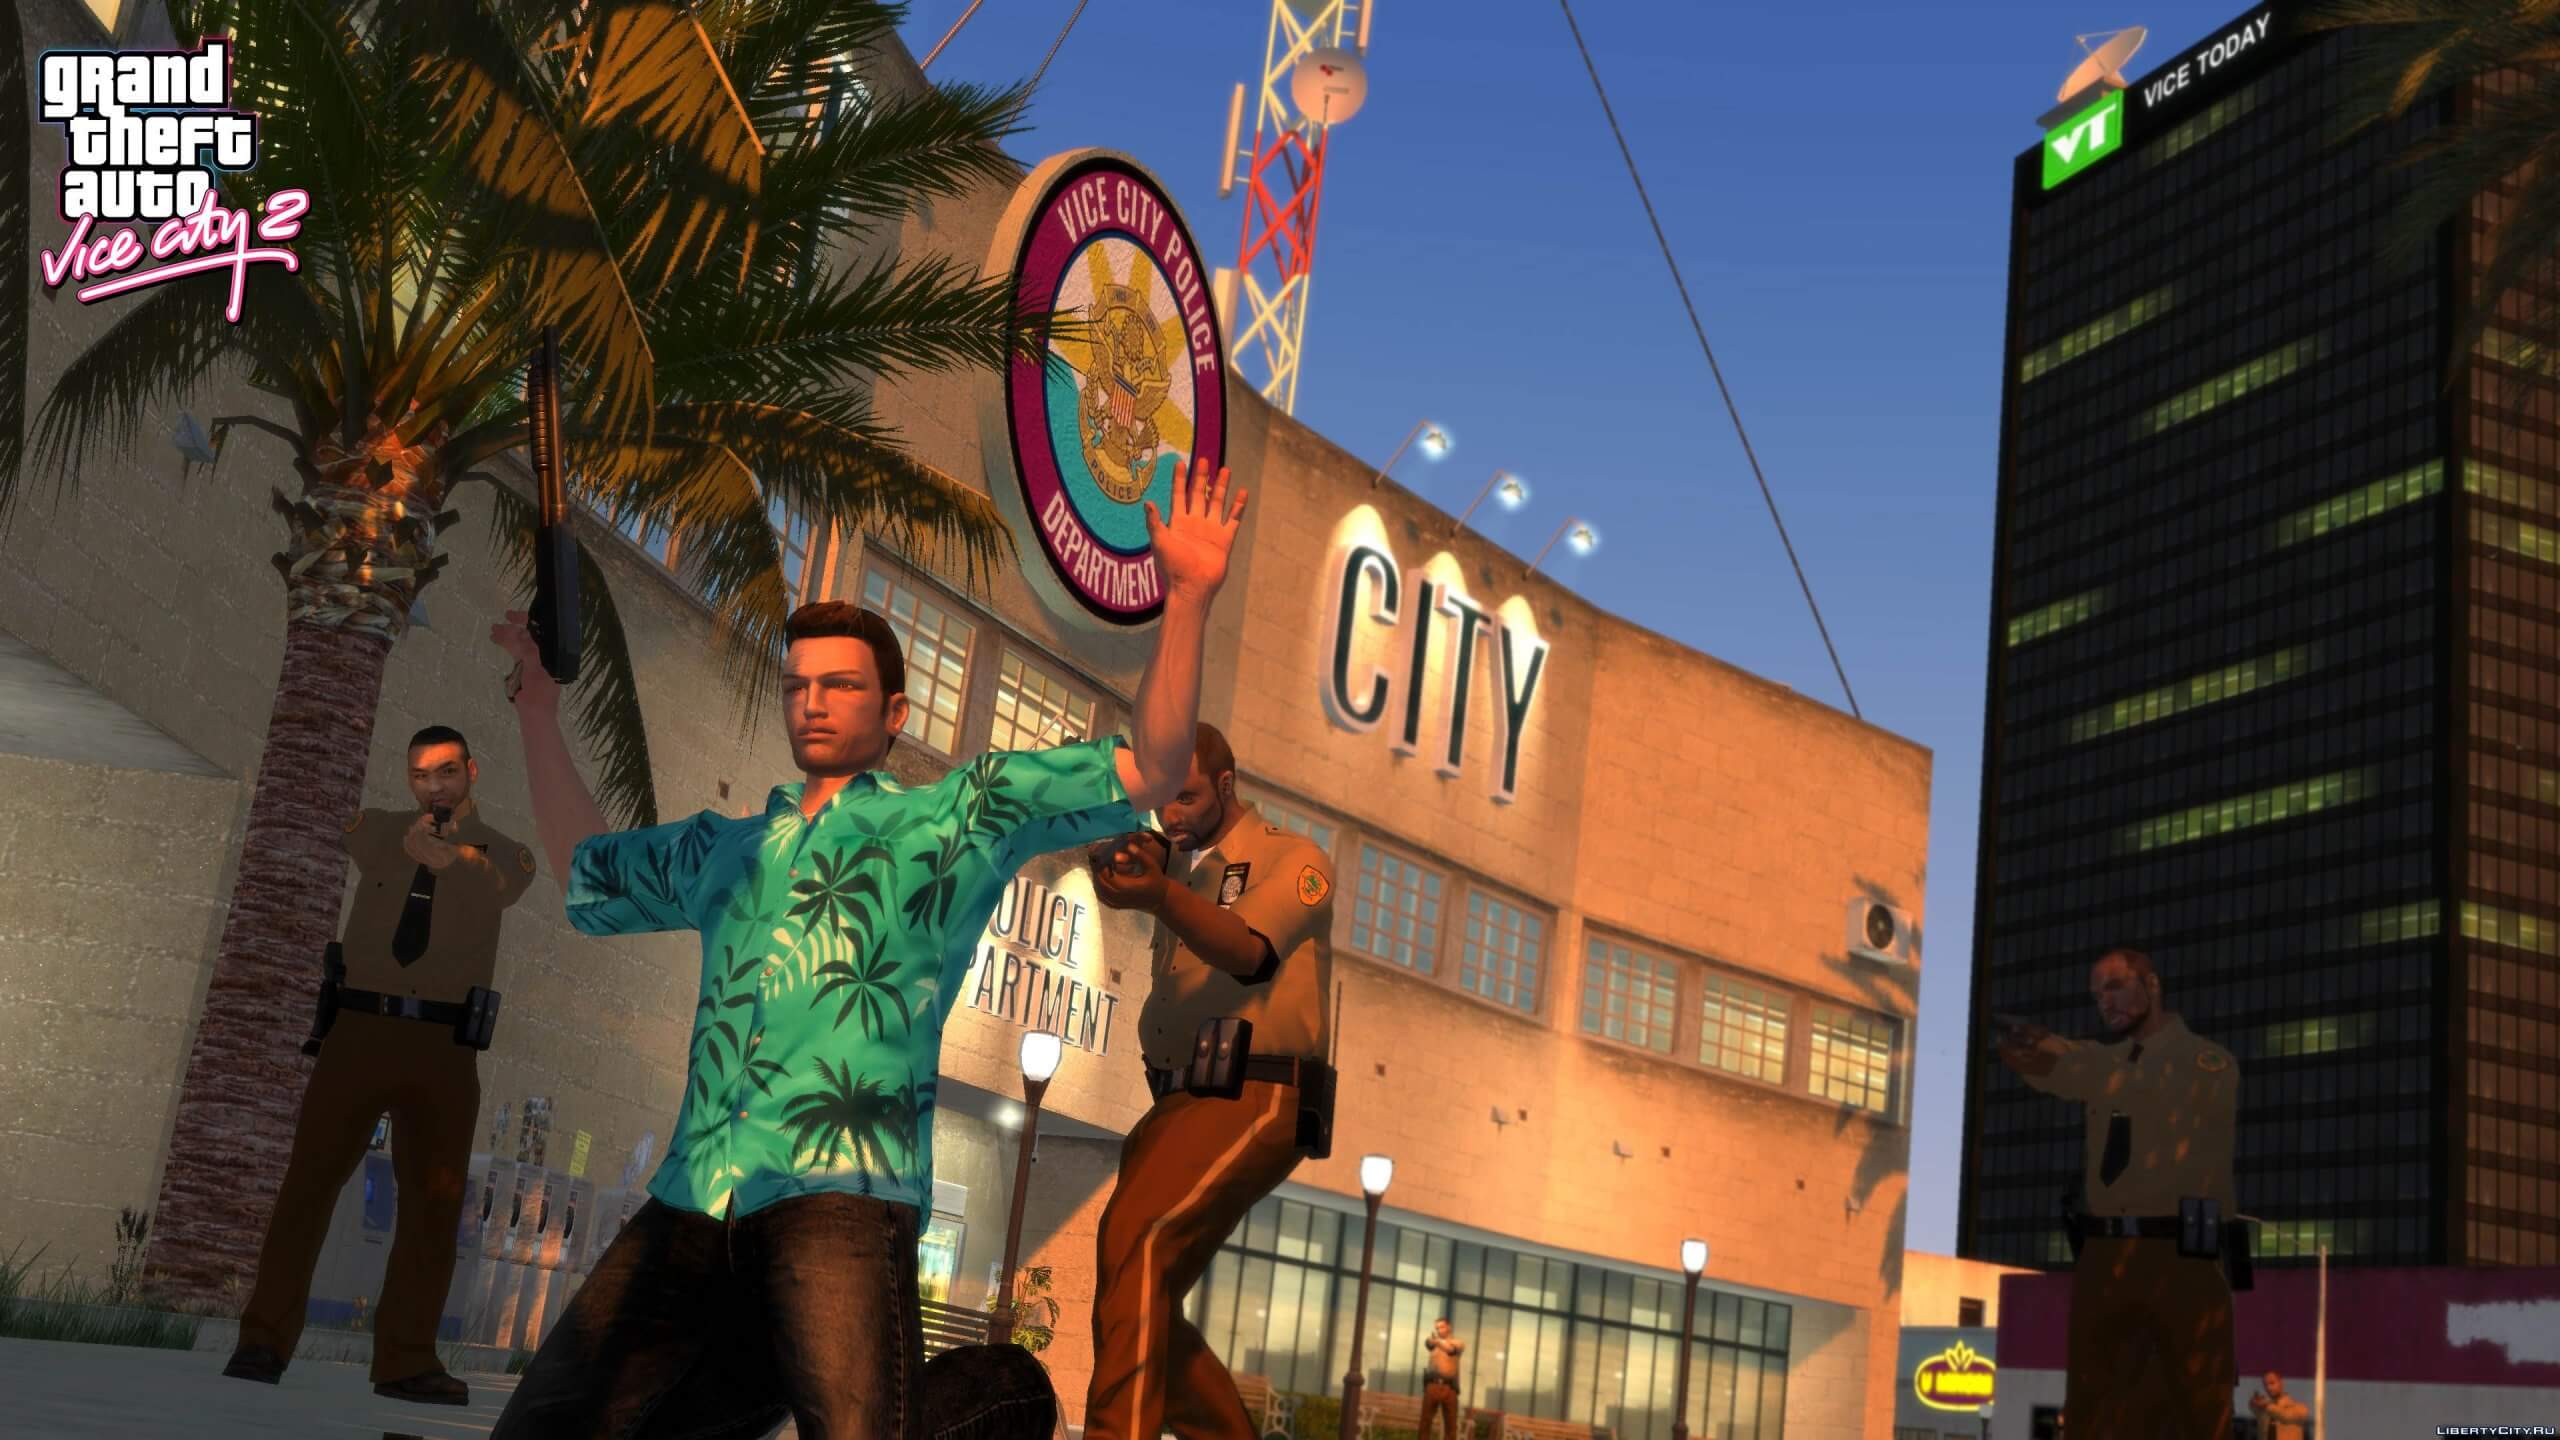 unofficial-grand-theft-auto-vice-city-remaster-in-rage-engine-released